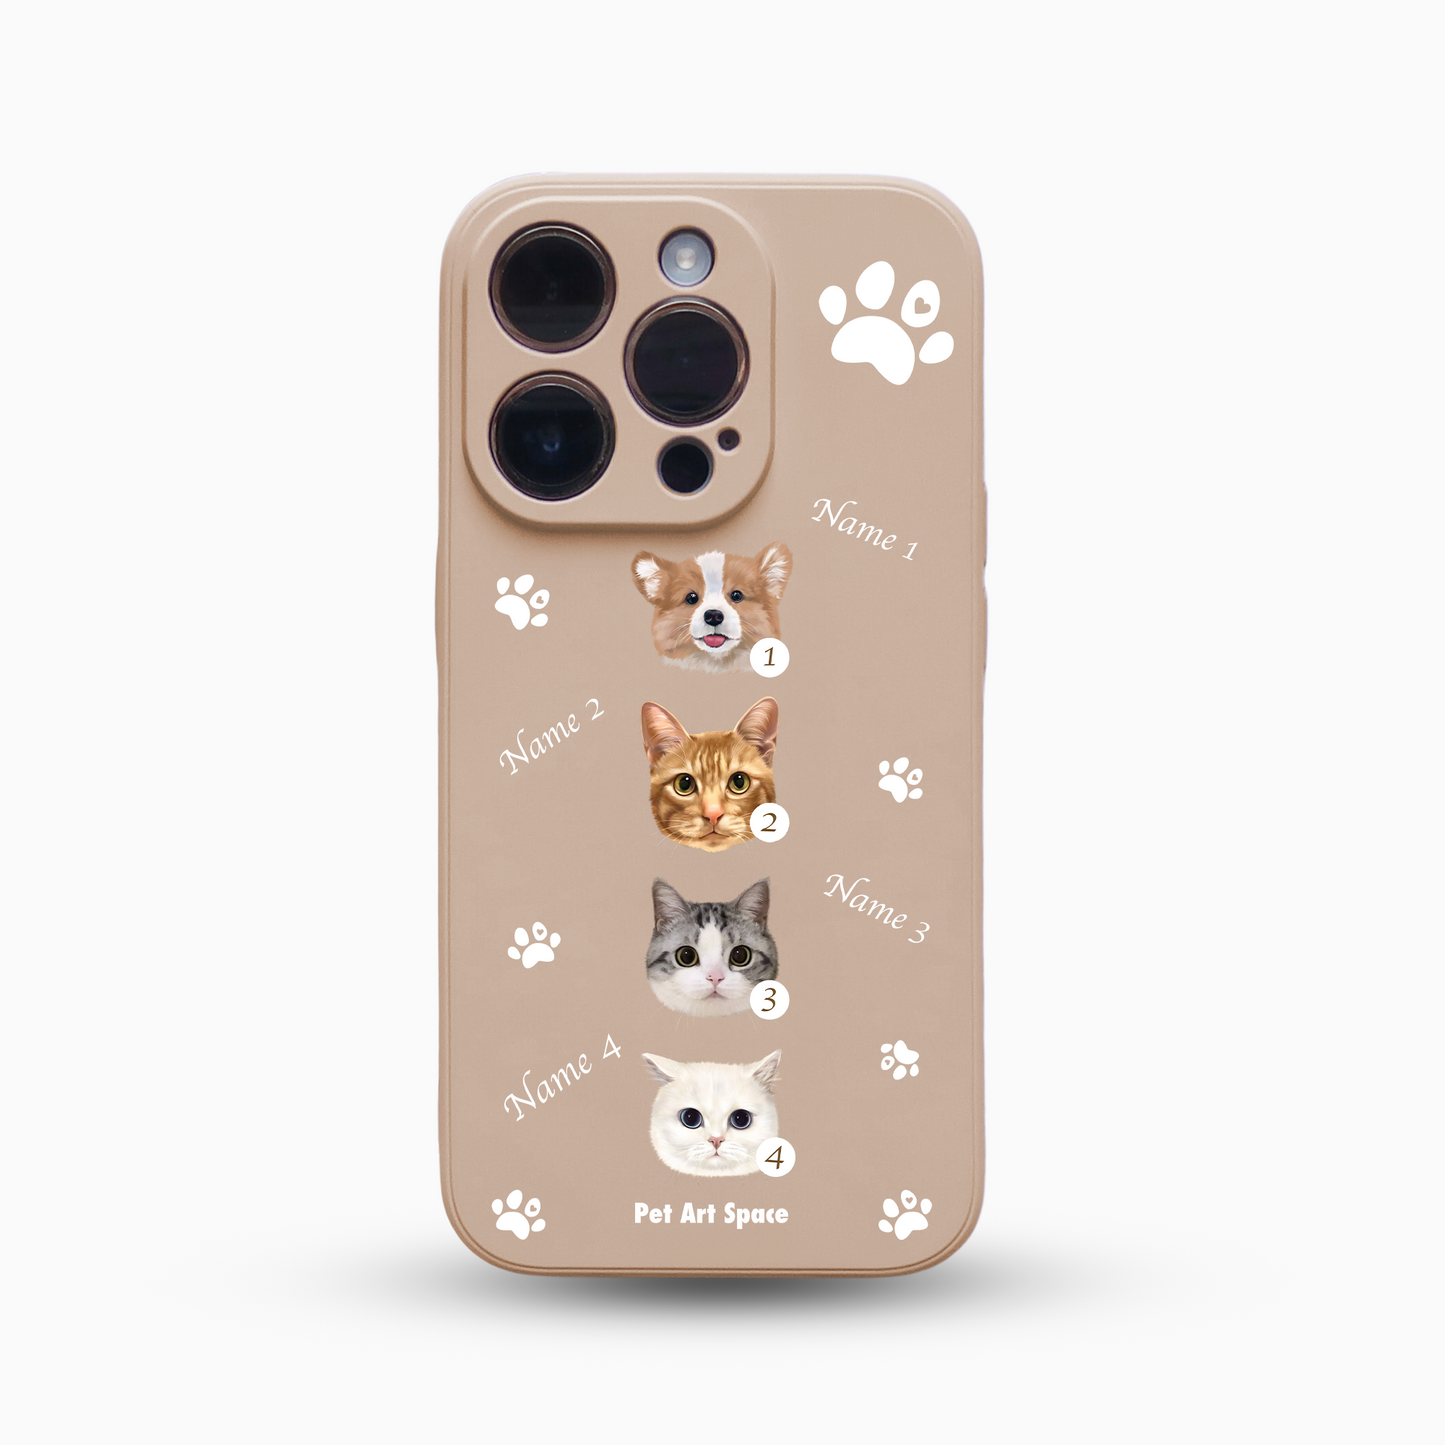 Paws for 4 Pets - Silicone Case - Beige